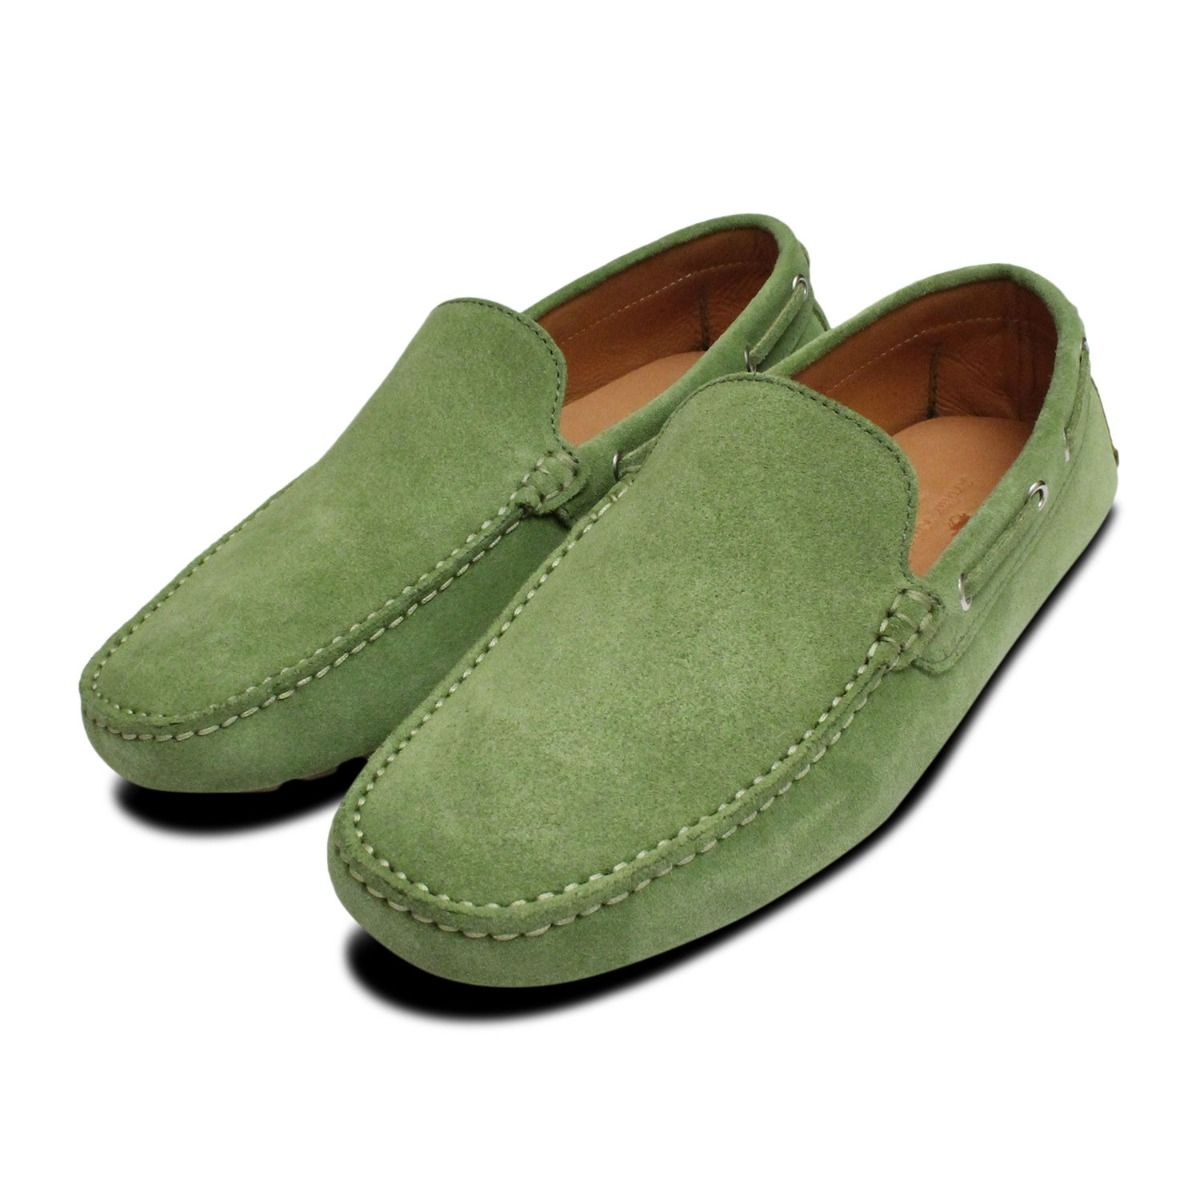 Mint Green Suede Shoes Hotsell | bellvalefarms.com